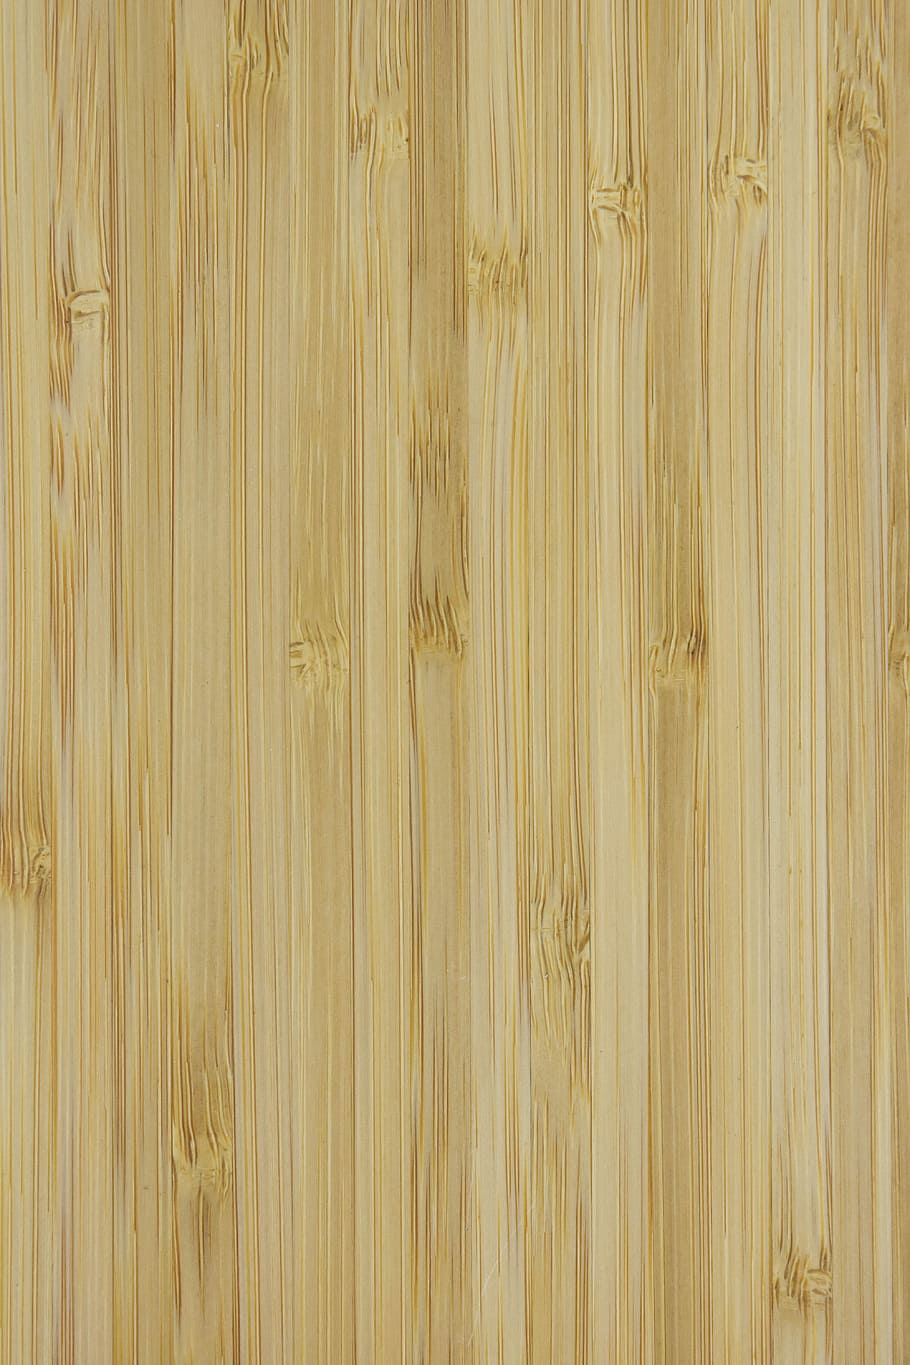 The Background, Wood, Wooden, Retro, Texture, Boards, HD Wallpaper